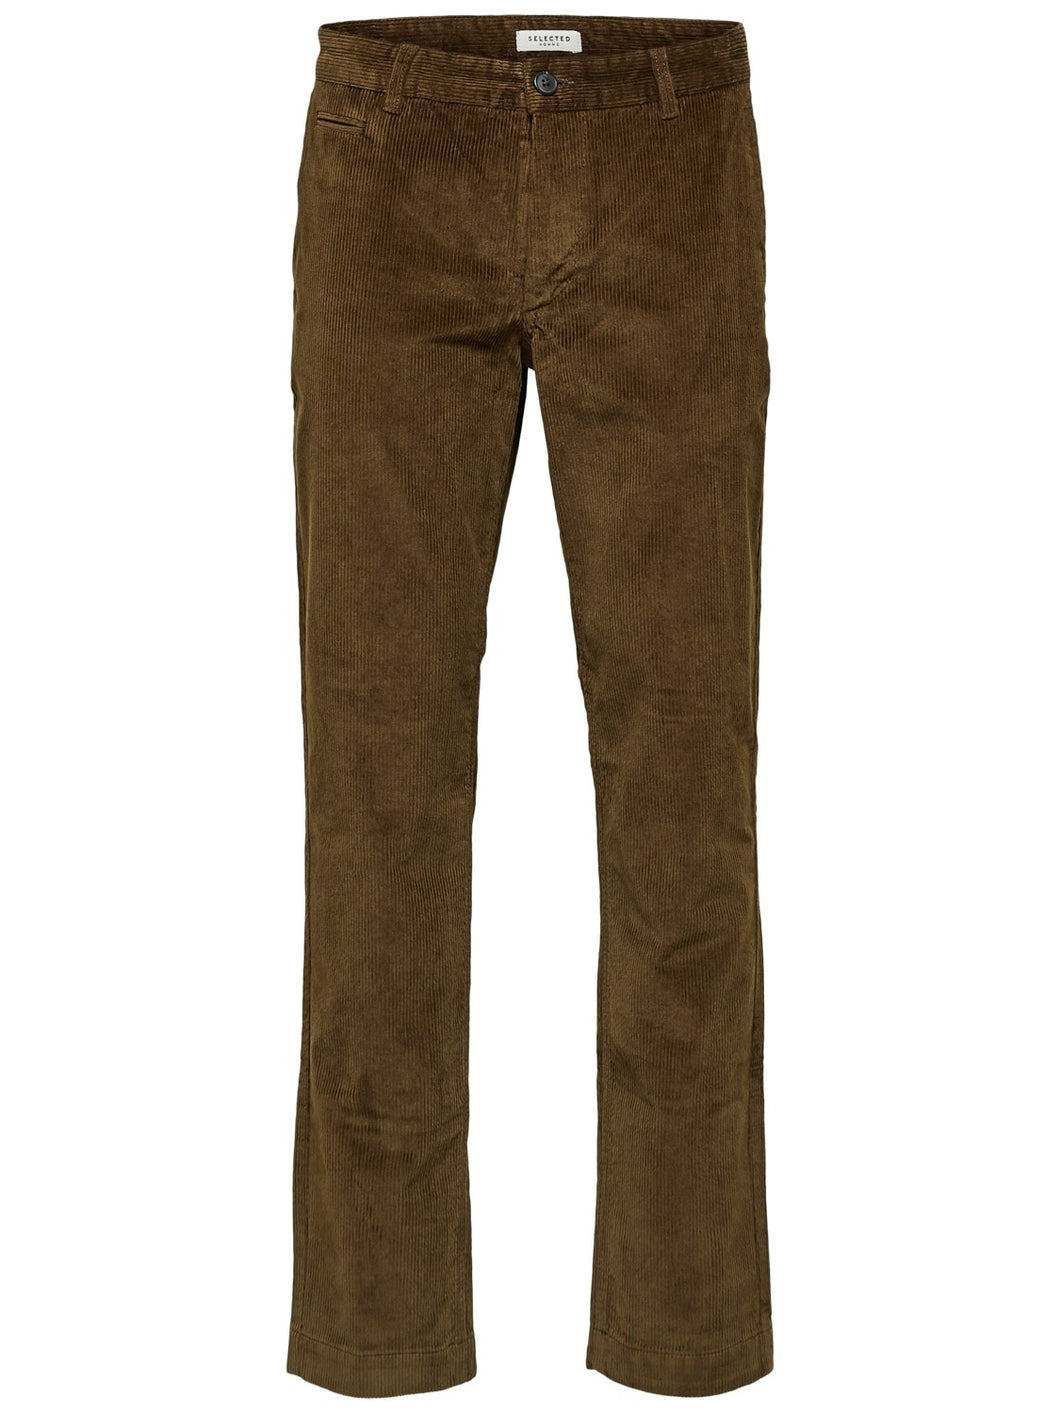 Selected Homme Ryan Cords Olive